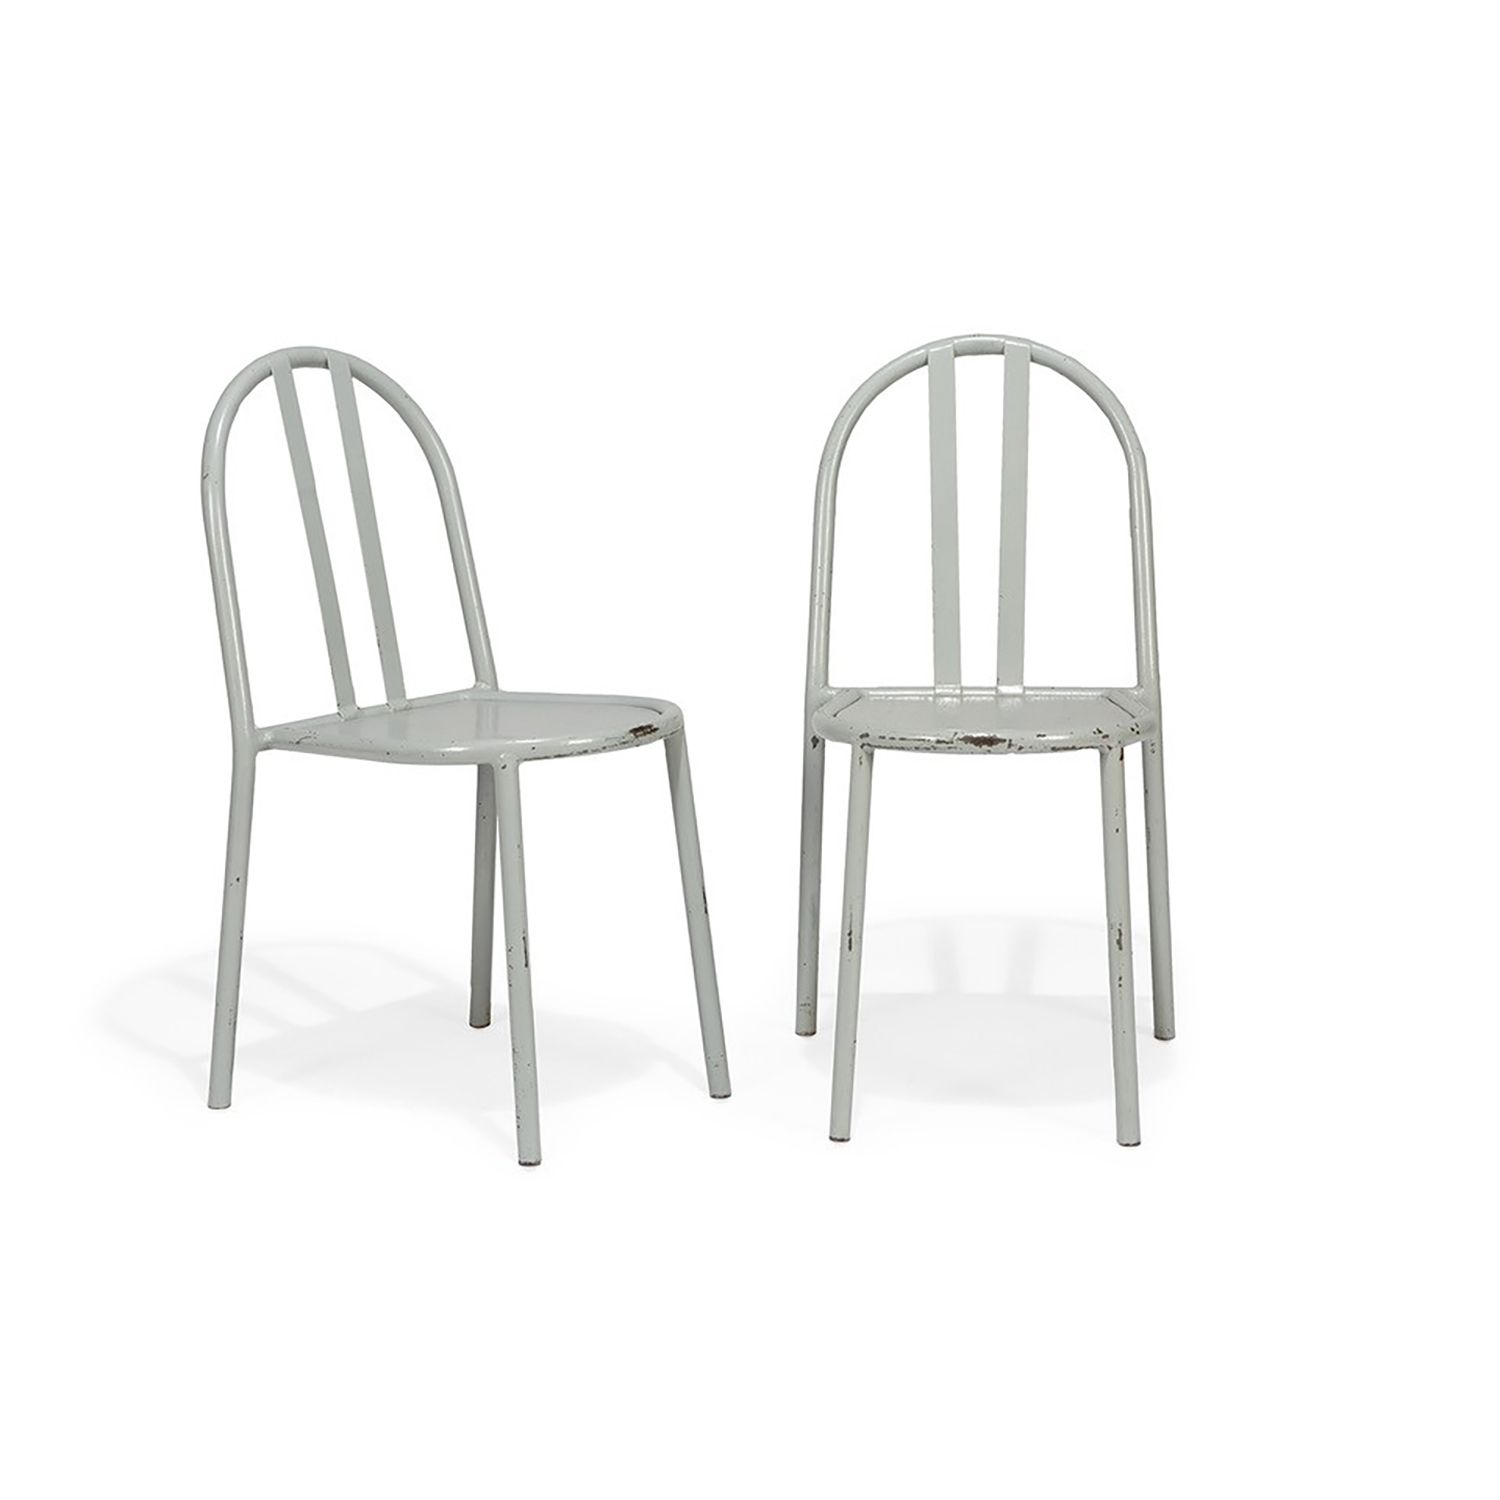 Null ROBERT MALLET-STEVENS (1886-1945)

A pair of modernist chairs, grey lacquer&hellip;